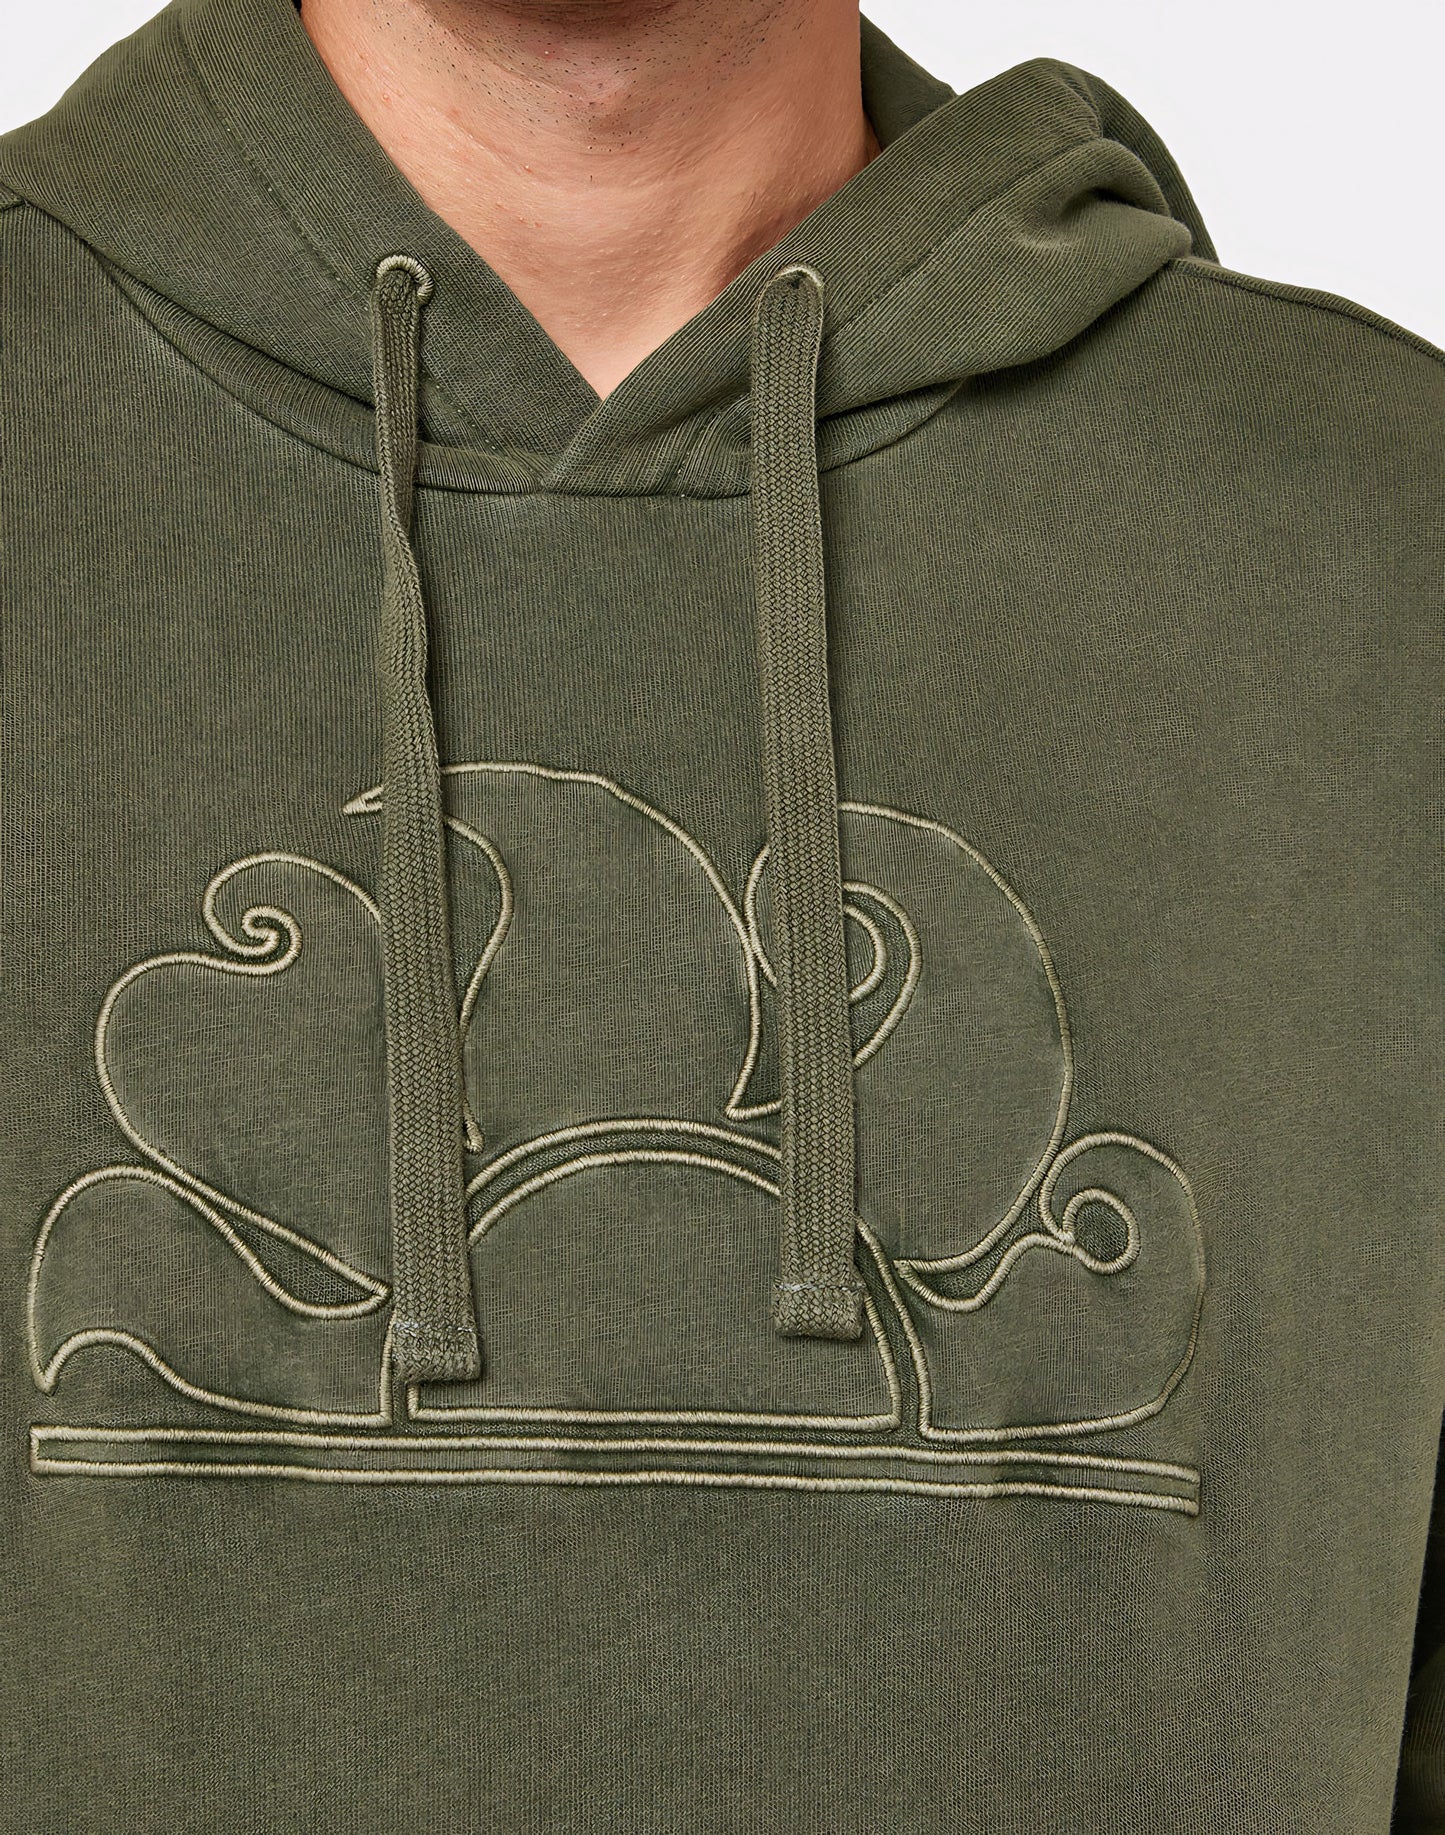 HOODIE WITH EMBROIDERED LOGO